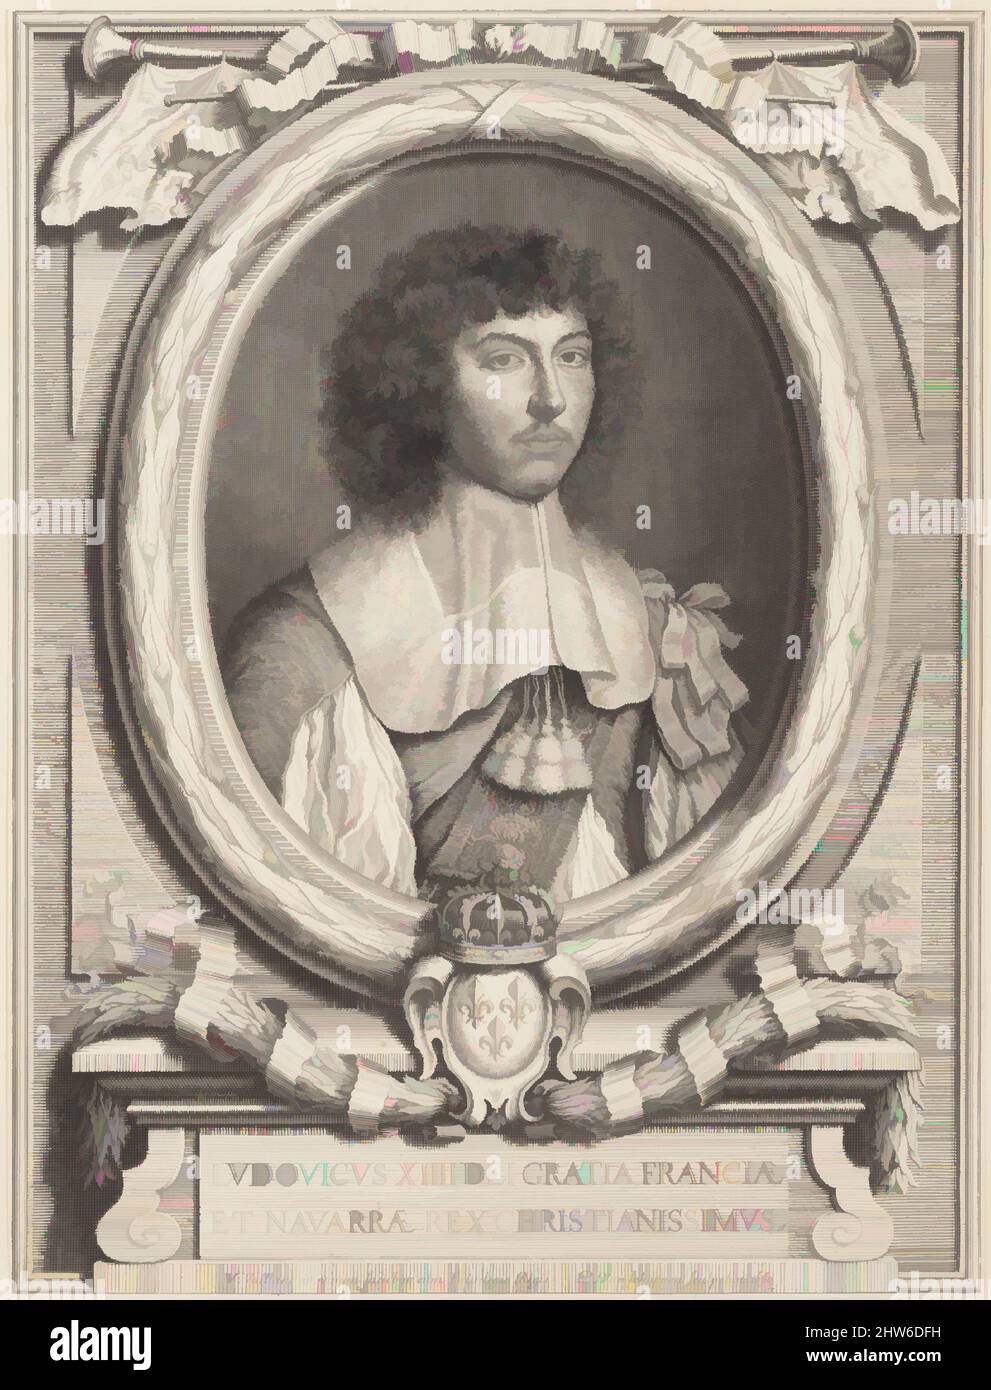 Art inspired by Portrait of Louis XIV, 1650–1702, Engraving, sheet: 13 1/16 x 9 13/16 in. (33.2 x 25 cm), Prints, Pieter Louis van Schuppen (Flemish, 1627–1702), After Wallerant Vaillant (Dutch, Lille 1623–1677 Amsterdam, Classic works modernized by Artotop with a splash of modernity. Shapes, color and value, eye-catching visual impact on art. Emotions through freedom of artworks in a contemporary way. A timeless message pursuing a wildly creative new direction. Artists turning to the digital medium and creating the Artotop NFT Stock Photo